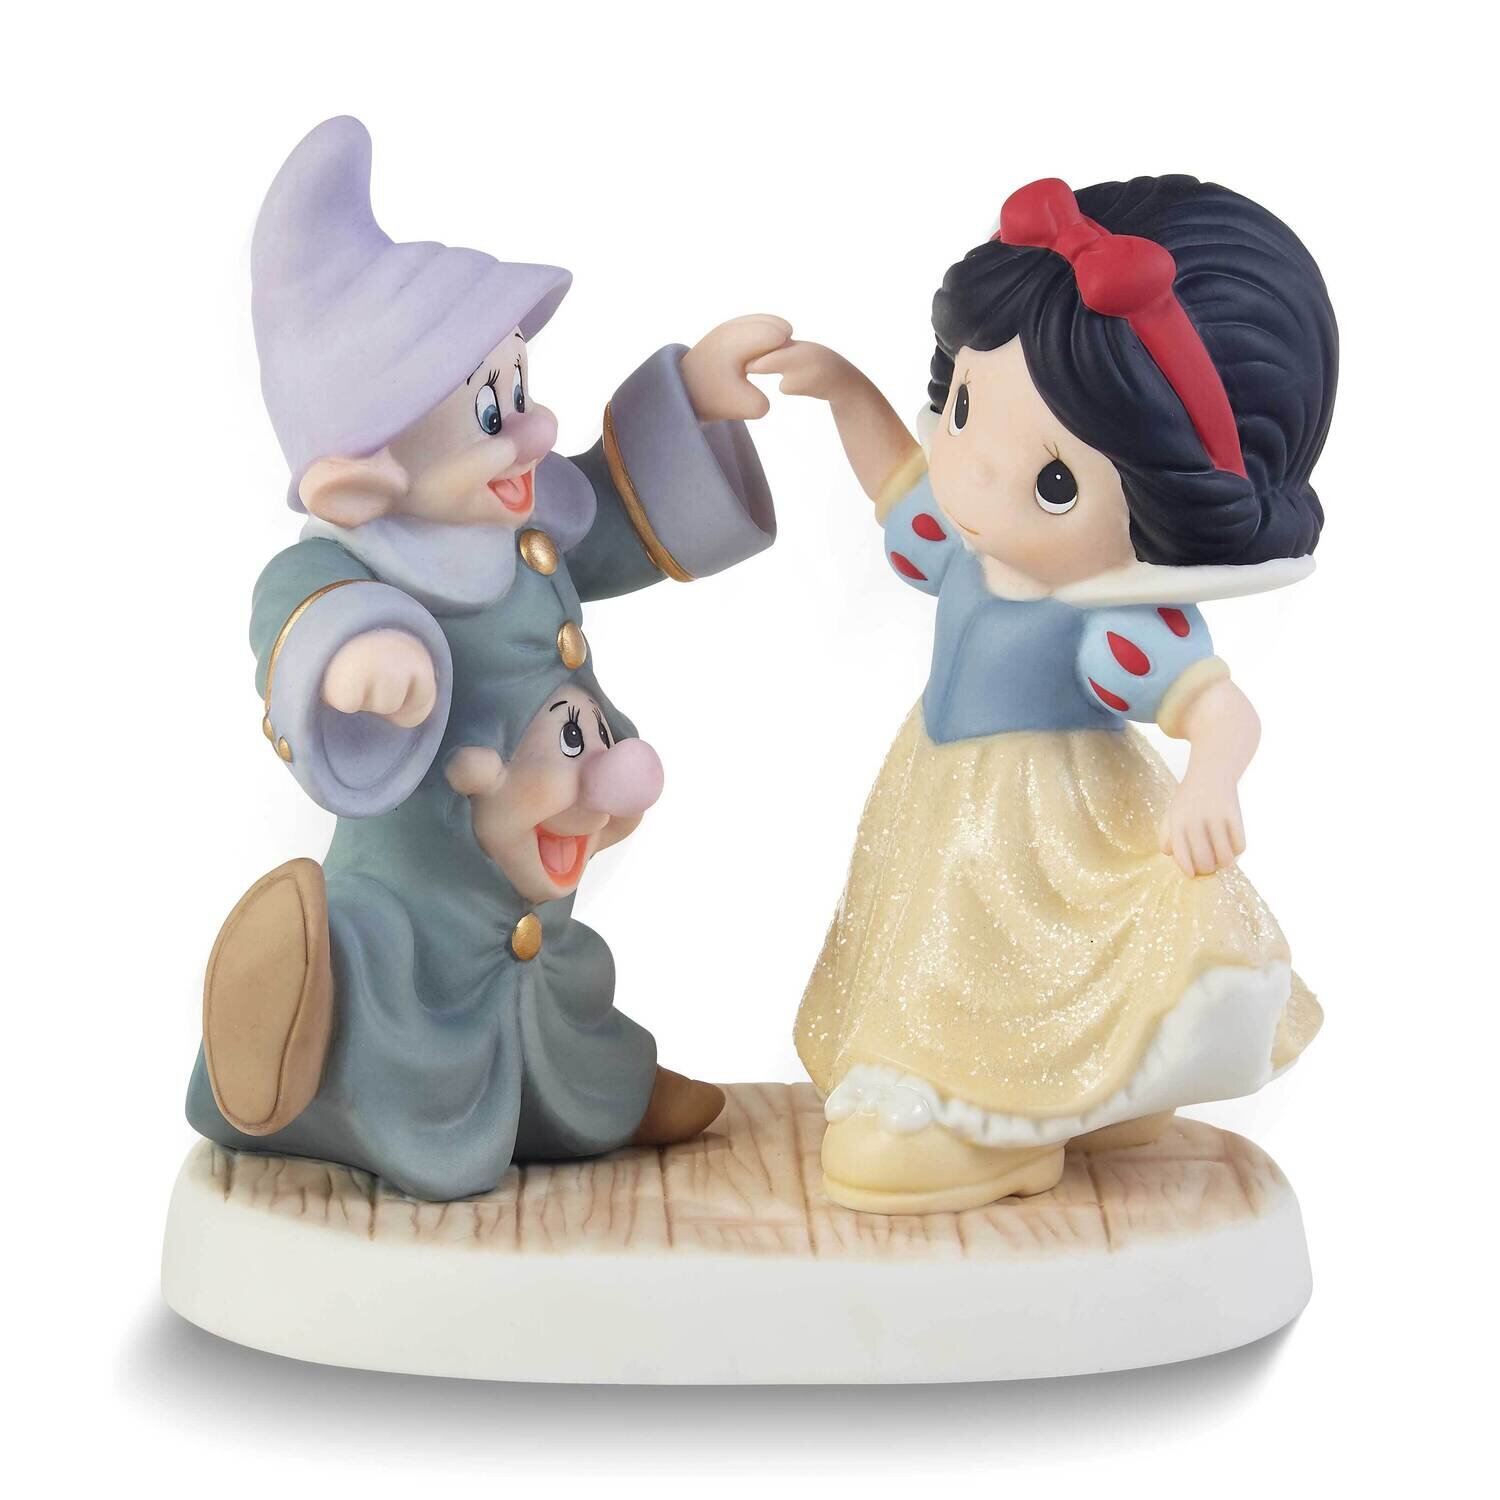 Precious Moments Disney Snow White Dancing Dopey and Sneezy Figurine GM25329